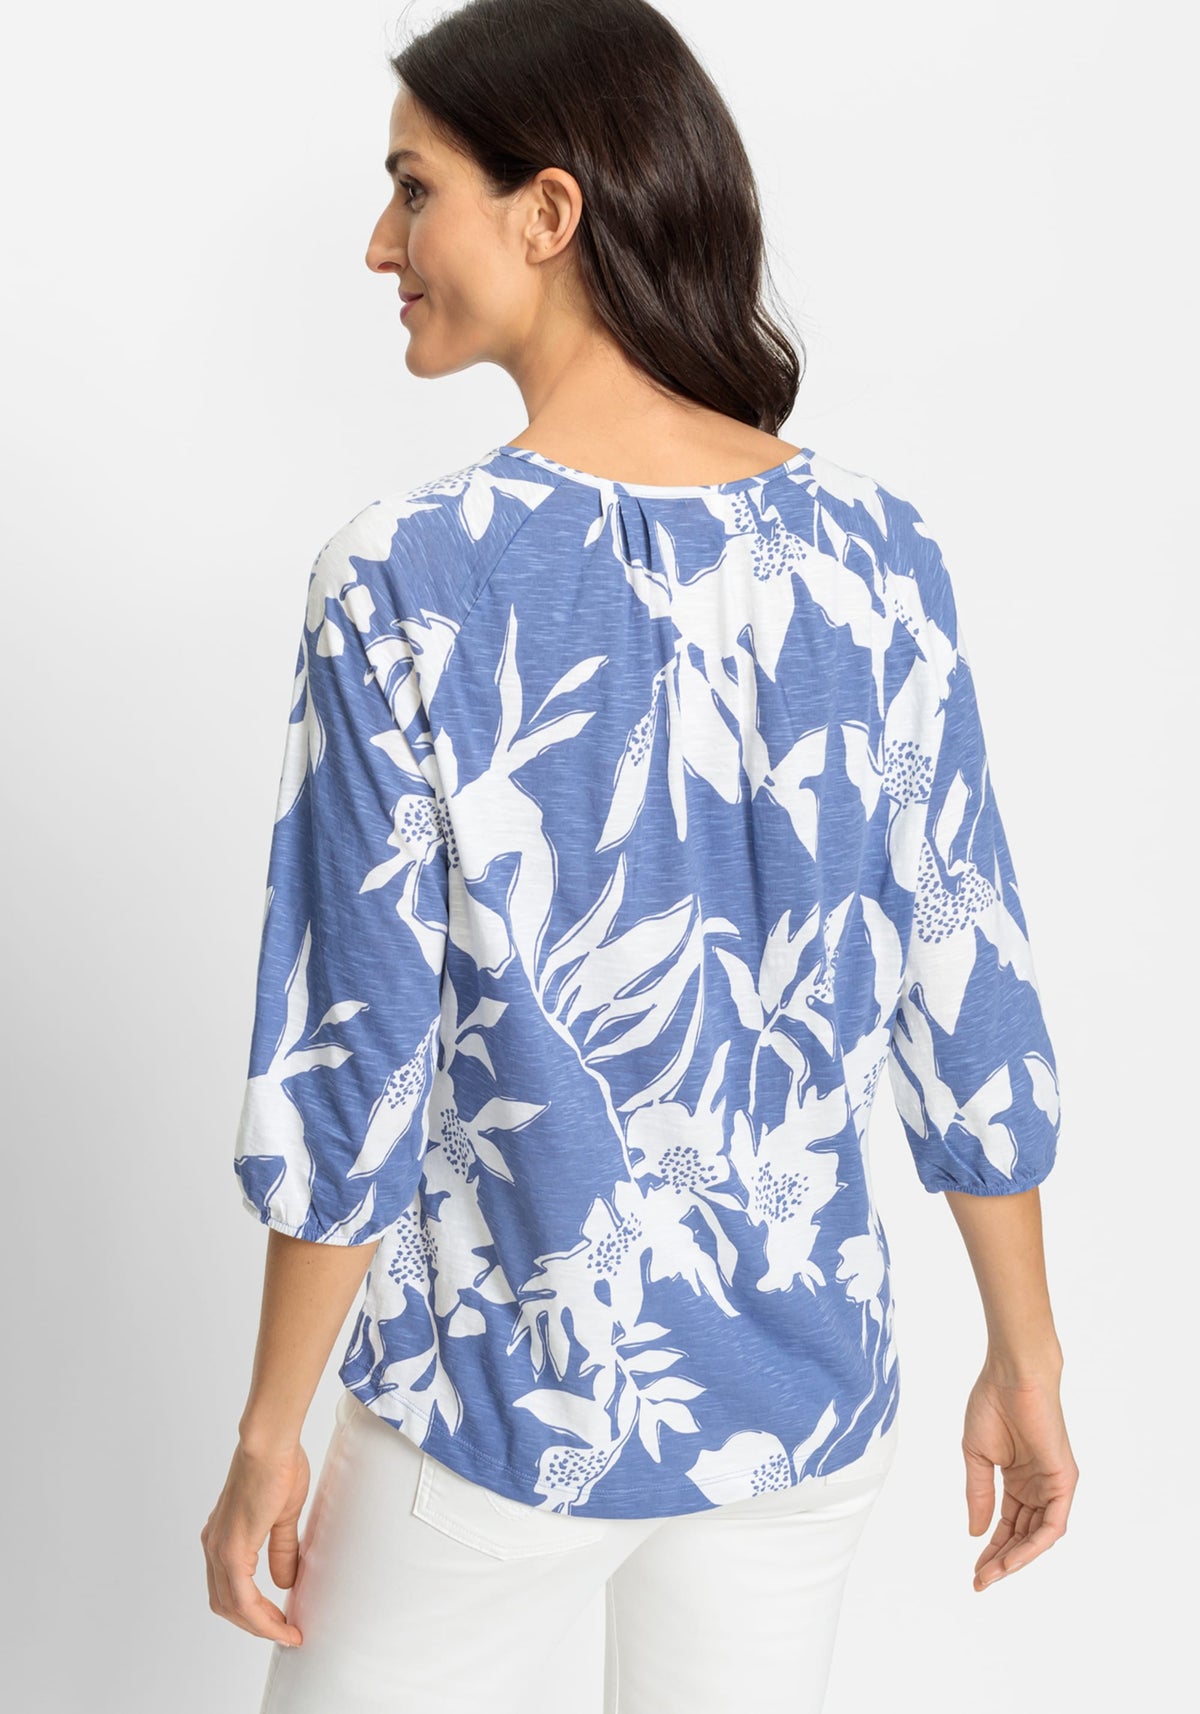 100% Organic Cotton 3/4 Sleeve Abstract Floral Print T-Shirt